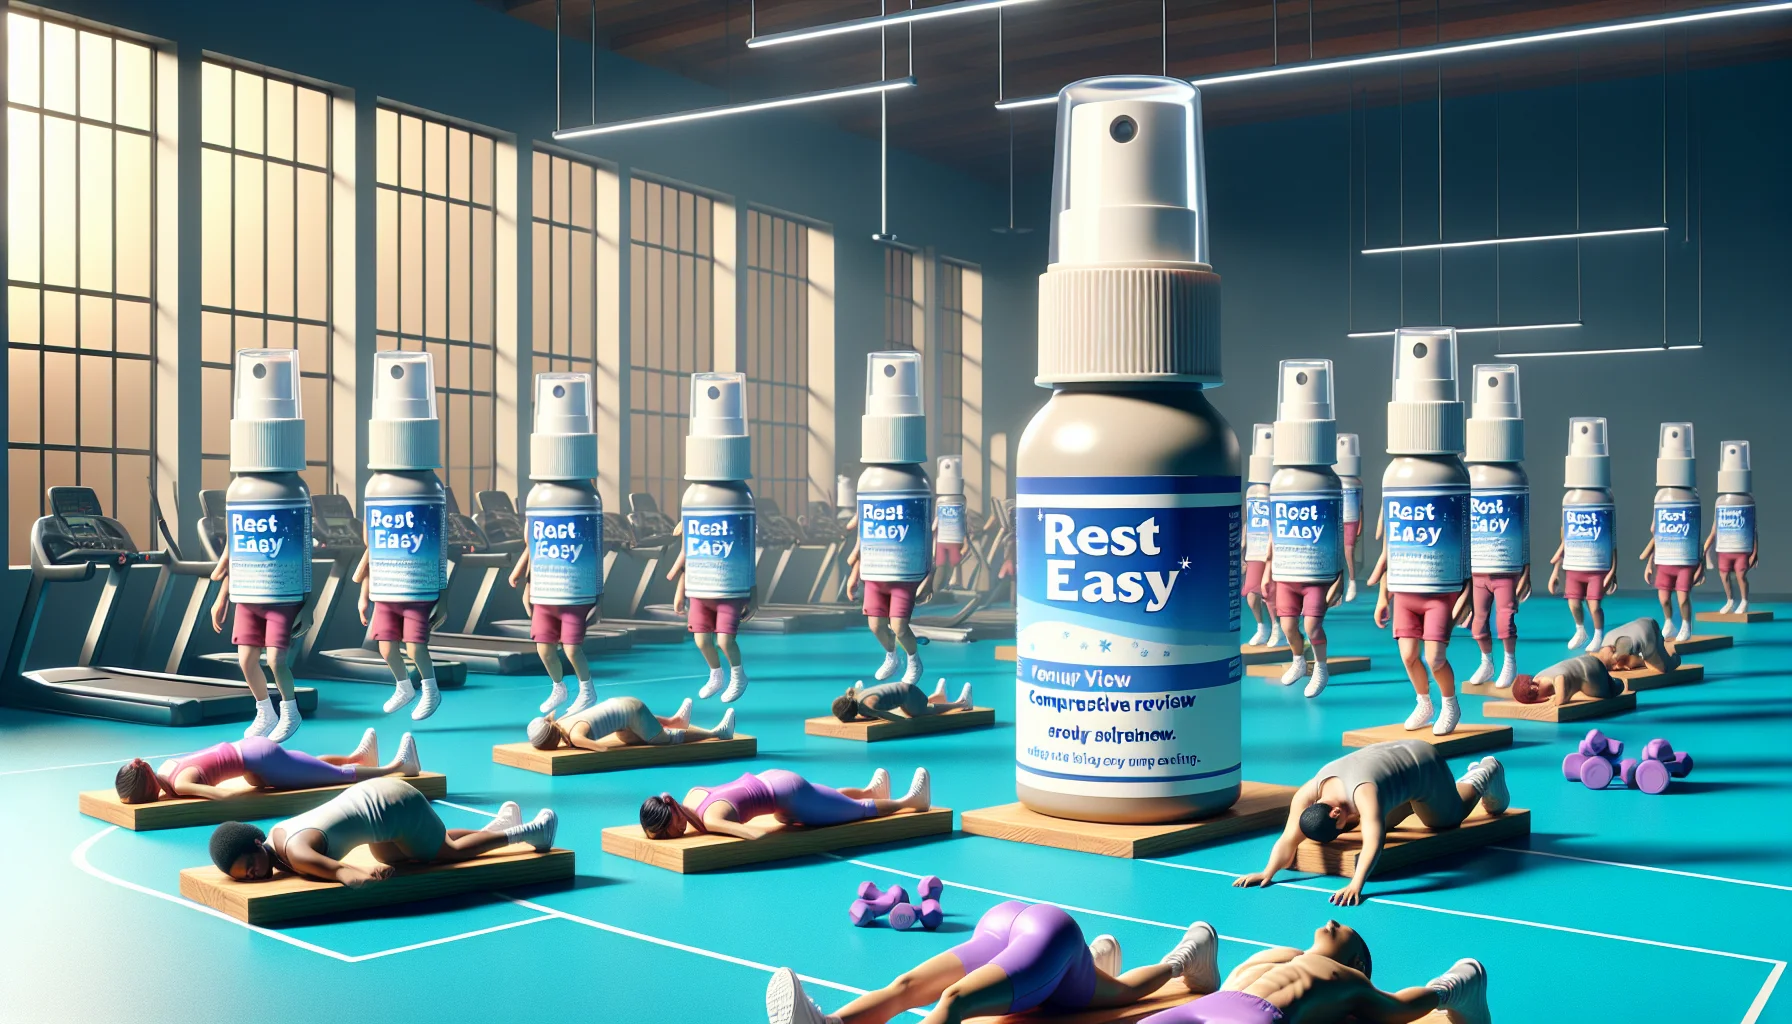 Create a humorous yet realistic scenario showcasing a comprehensive review of 'Rest Easy', a generic brand of sleep sprays. The scenario should creatively intertwine with the act of exercising. For instance, it could depict a scene where people of various descents and genders are trying to exercise while balancing sleepy bottles of 'Rest Easy' on their heads, all set in a brightly lit gym environment.